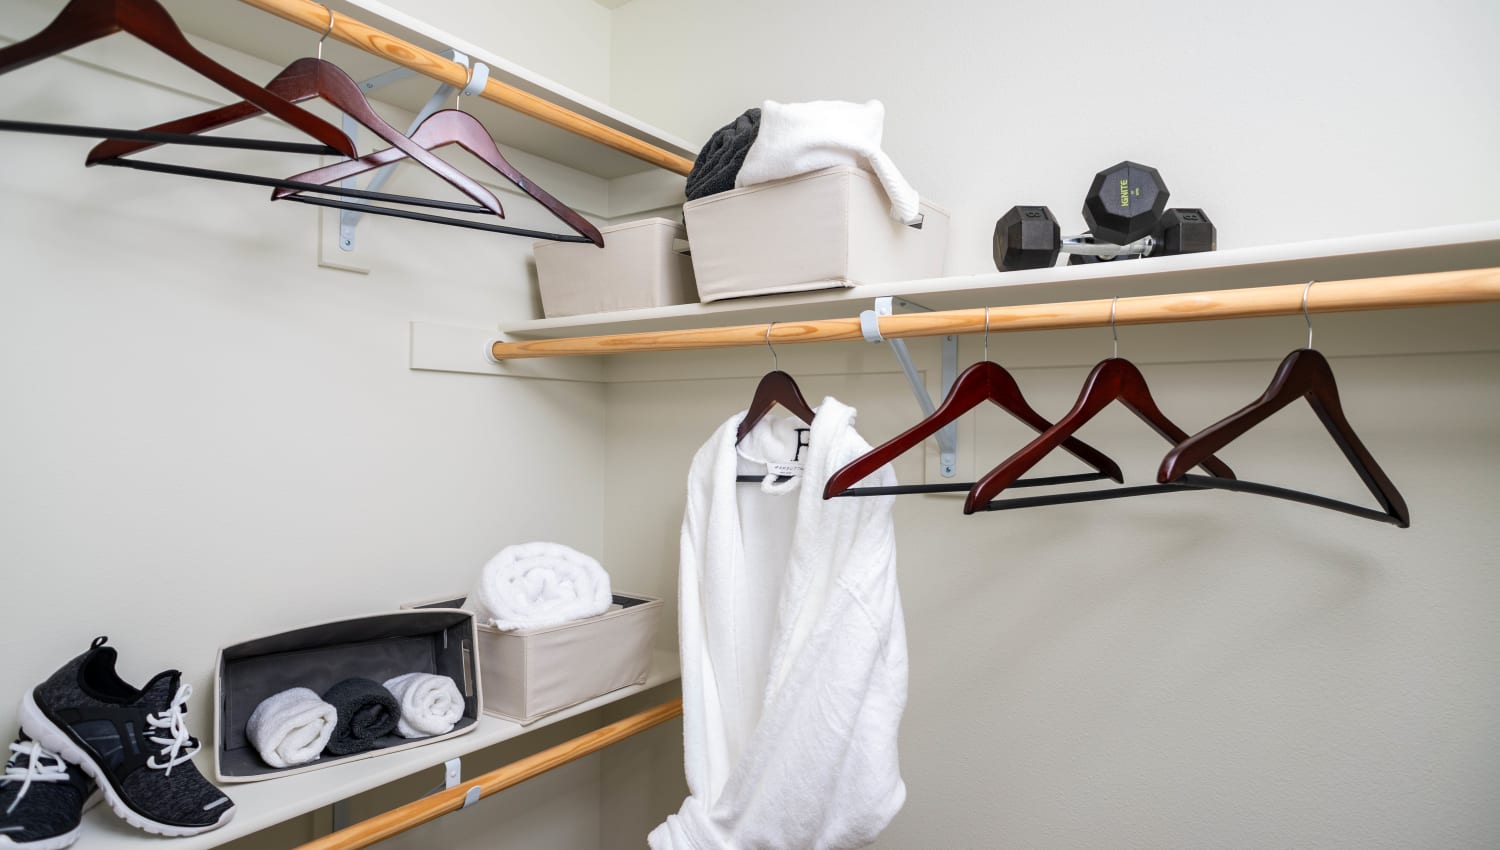 Walk-in closet with built-in shelving in a model home's bedroom at Fusion Apartments in Irvine, California